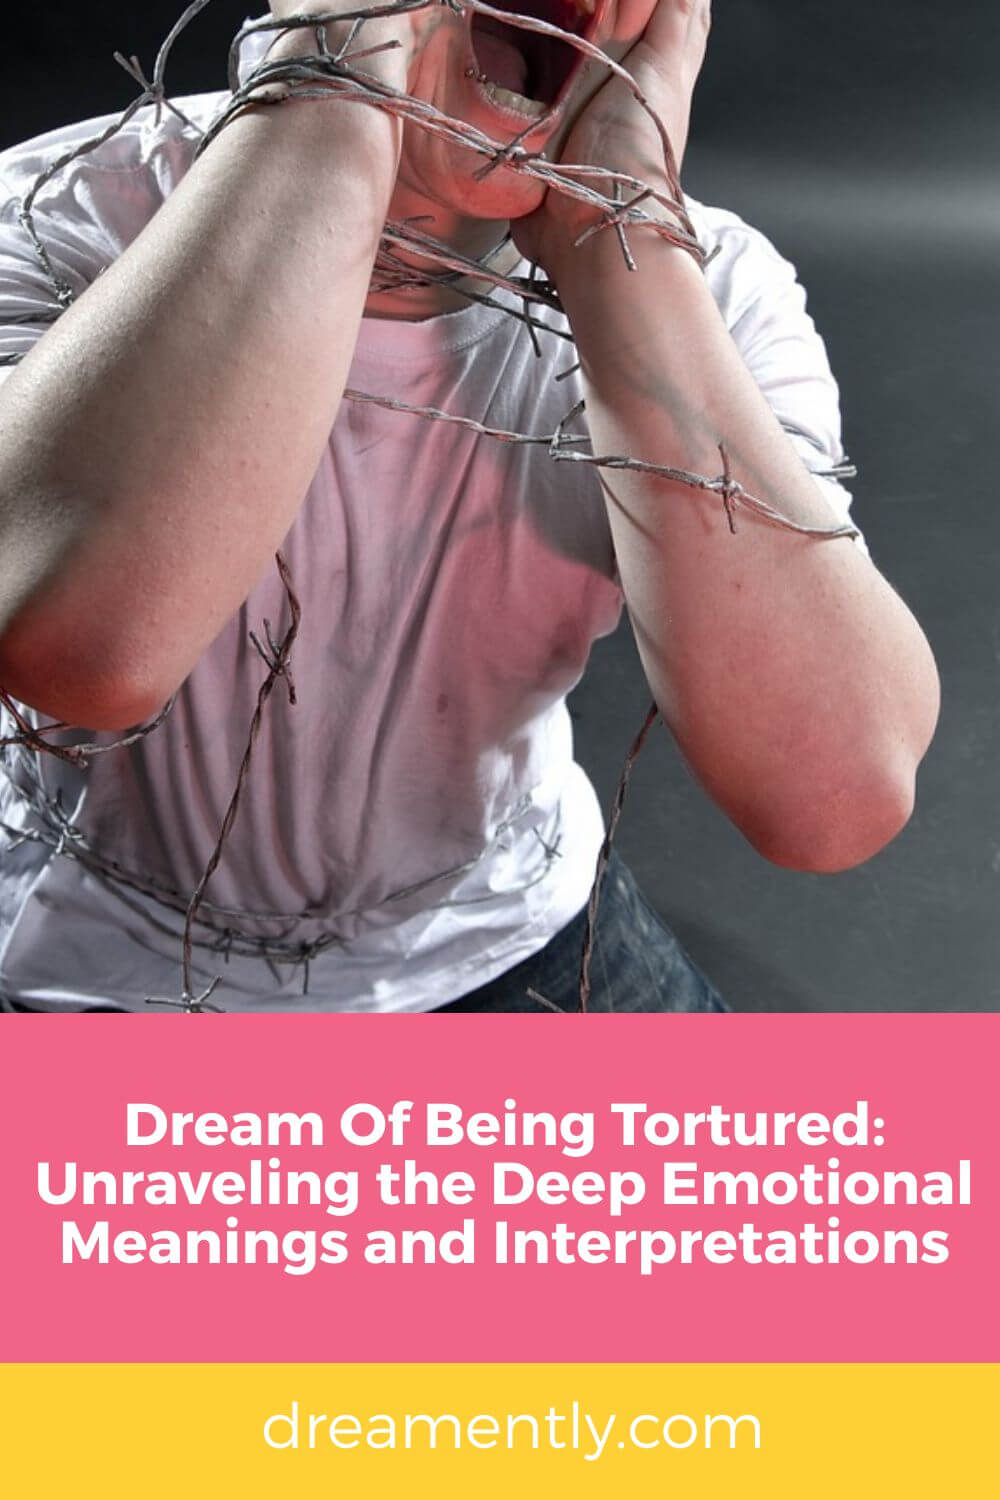 Dream Of Being Tortured- Unraveling the Deep Emotional Meanings and Interpretations (2)